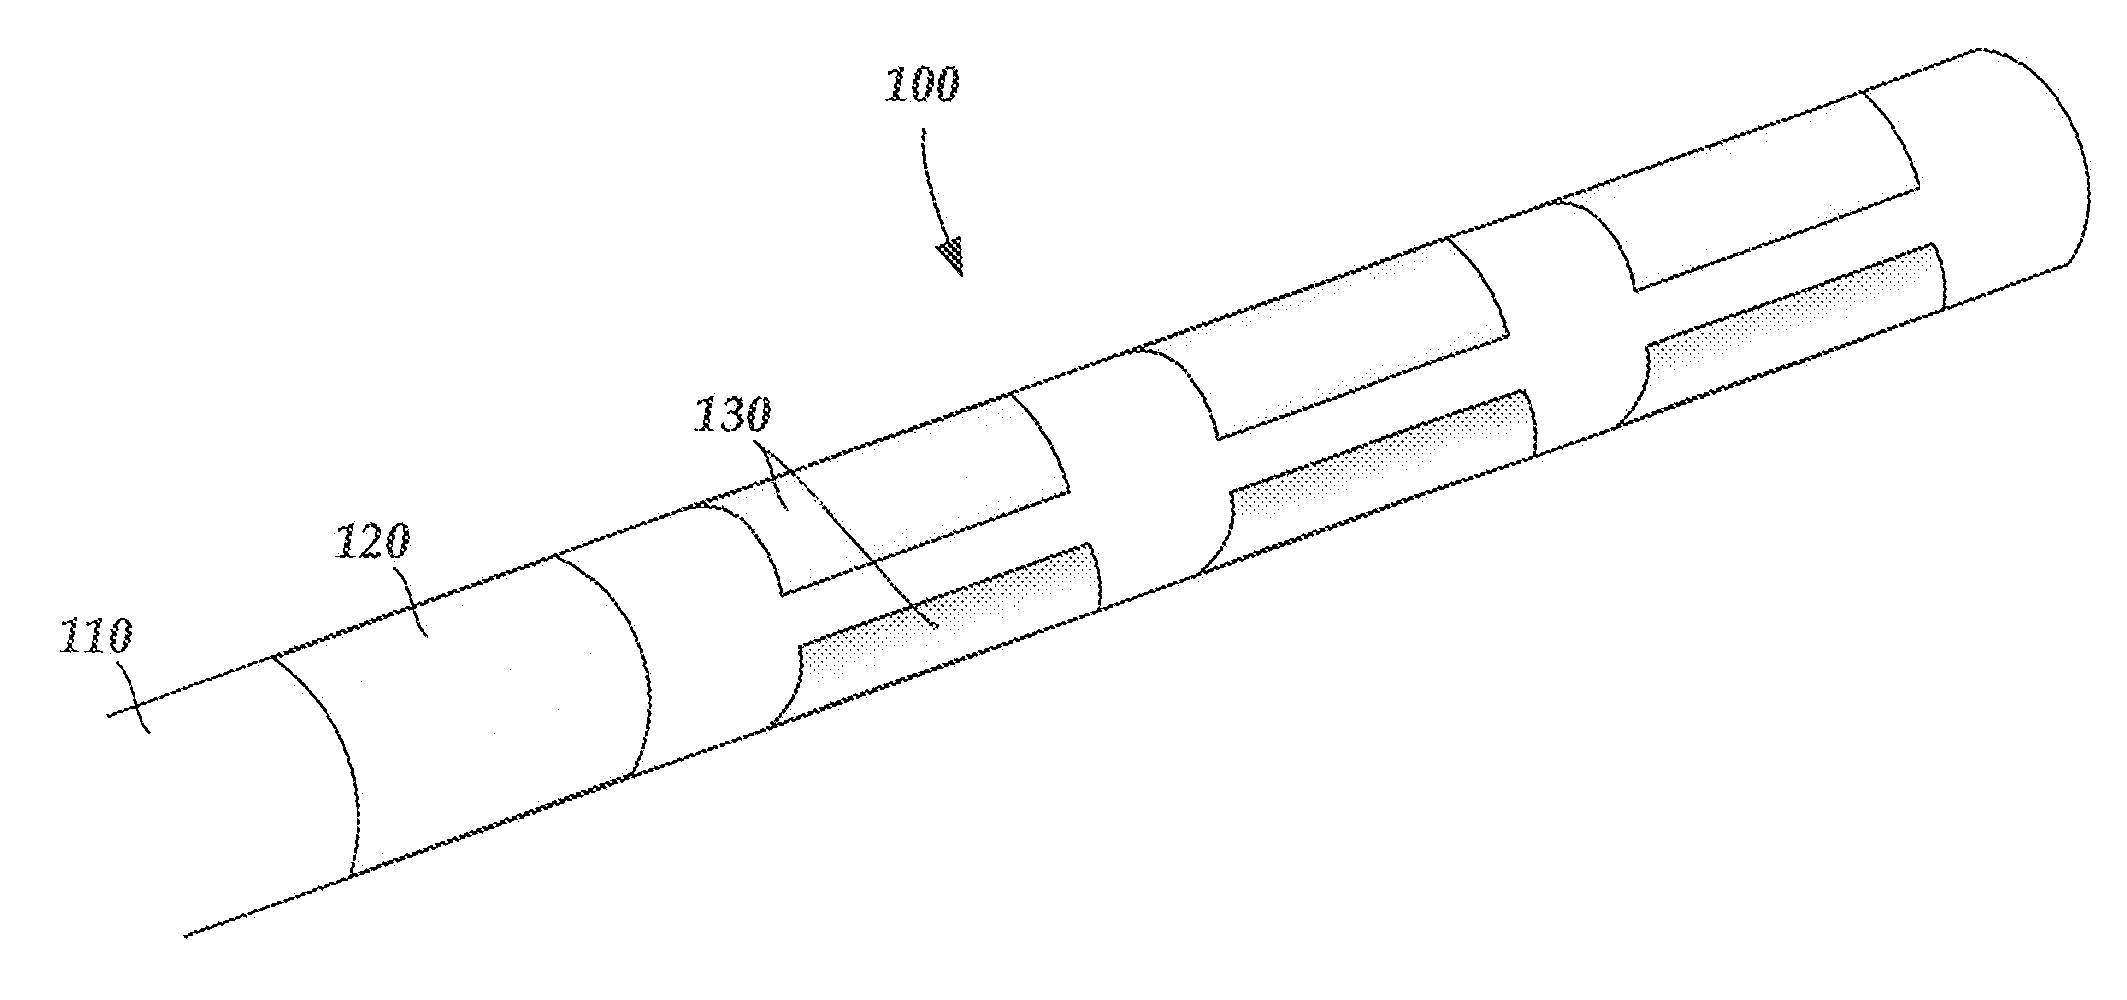 Electrode array having a rail system and methods of manufacturing the same